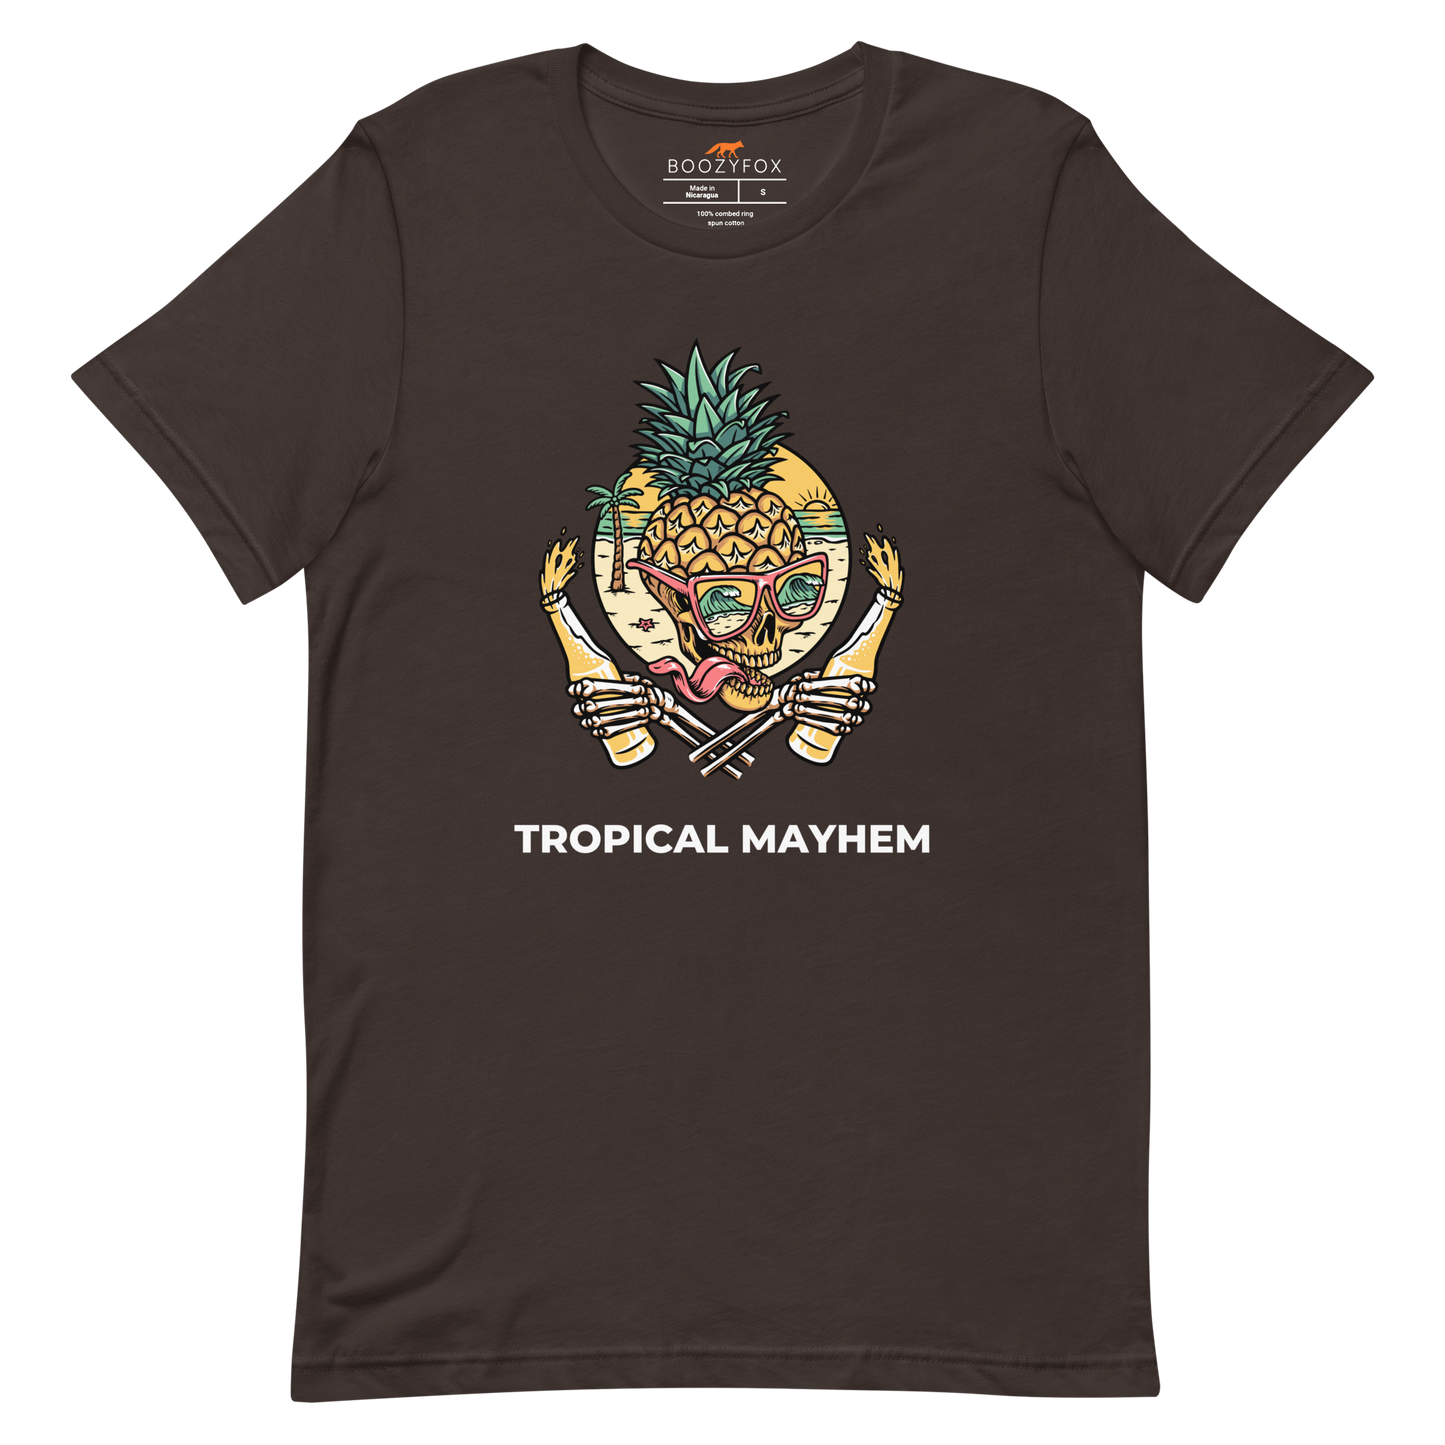 Brown Premium Tropical Mayhem Tee featuring a Crazy Pineapple Skull graphic on the chest - Funny Graphic Pineapple Tees - Boozy Fox